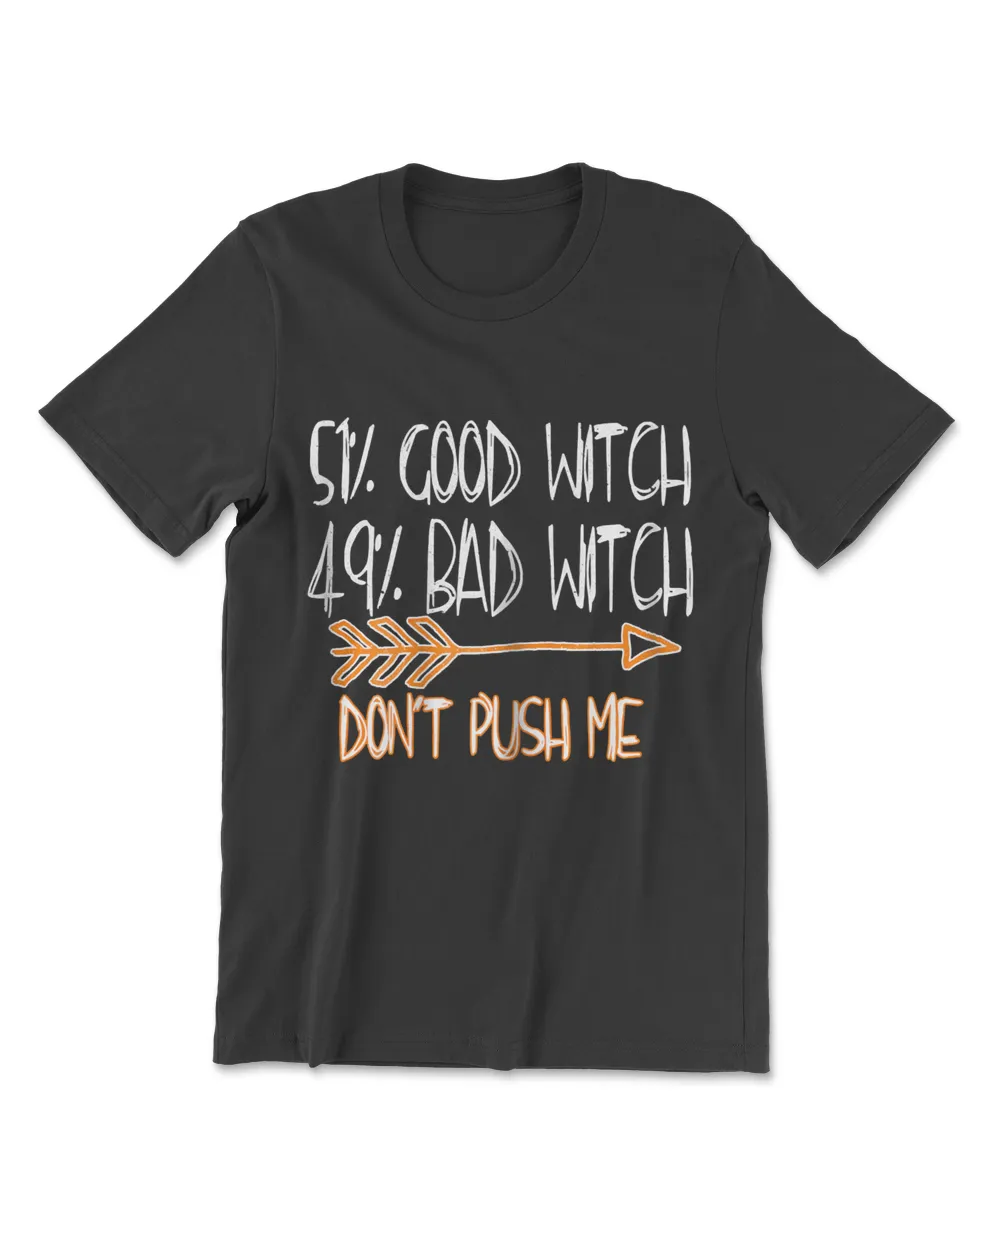 51 Good Witch 49 Bad Witch Shirt Great Hallowen Gift